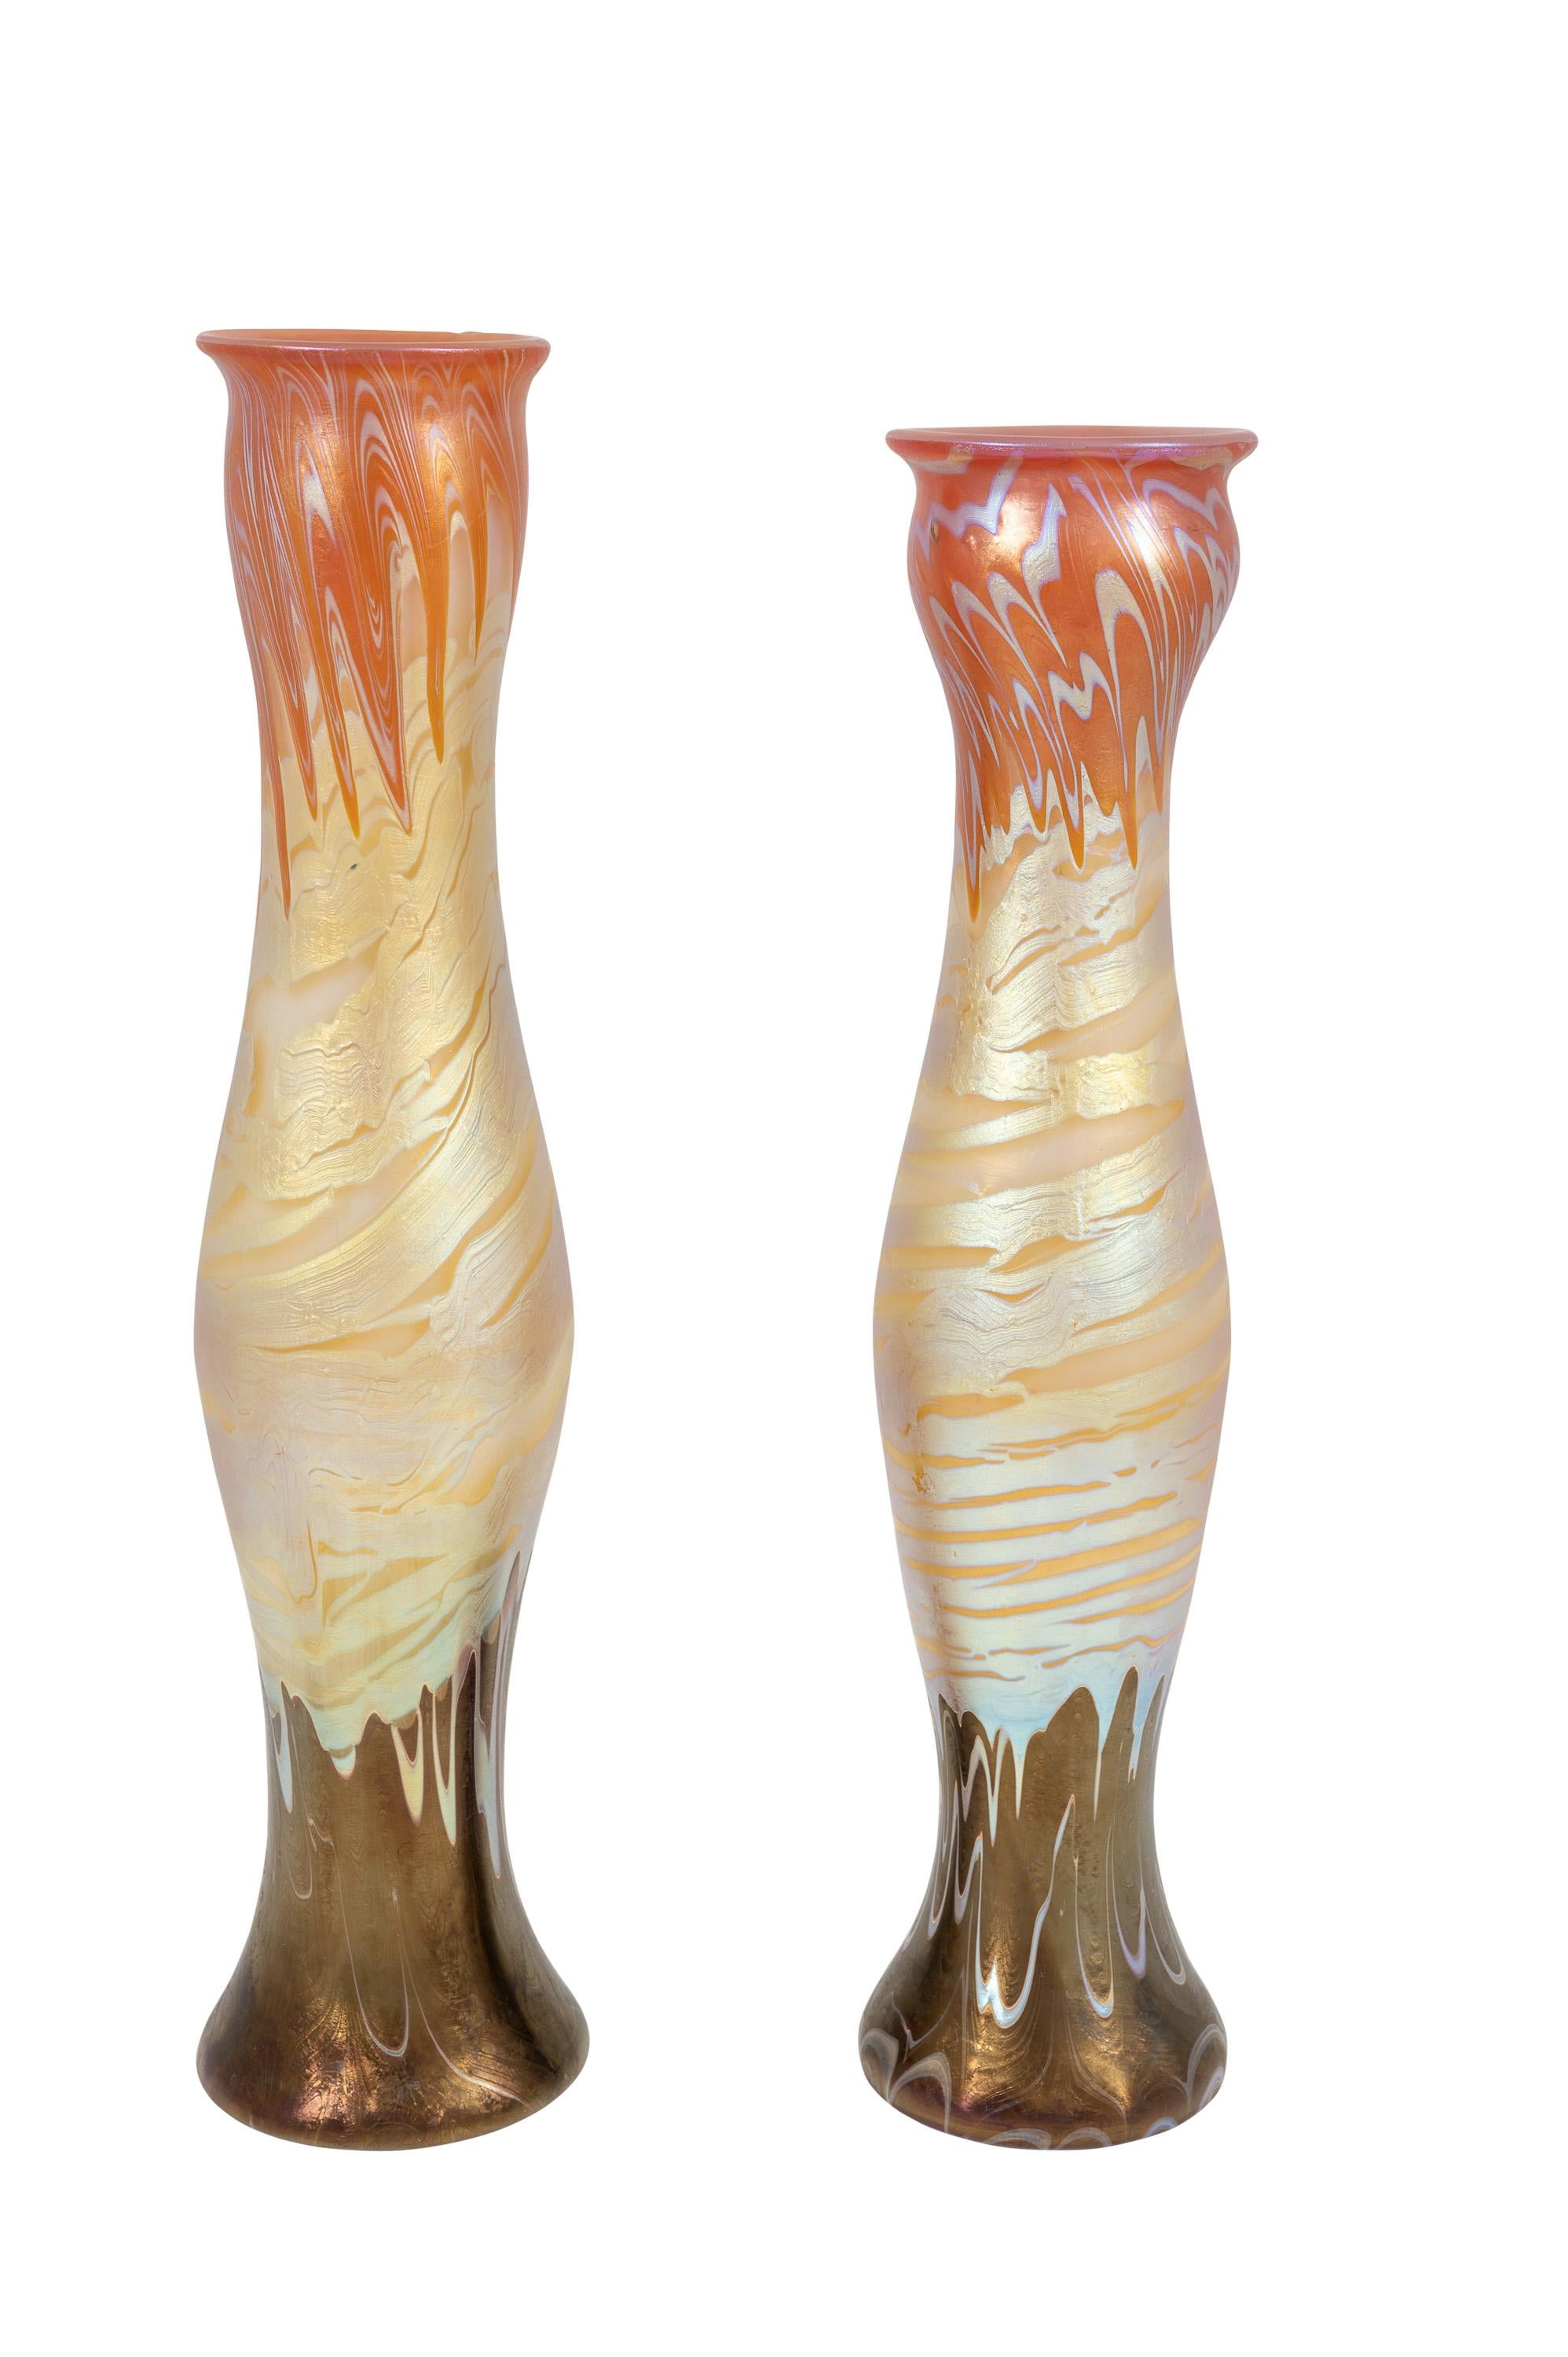 Pair of vases, manufactured by Johann Loetz Witwe, Phenomen Genre 358 decoration, circa 1900, Austrian Jugendstil Glass

This pair of vases is an extraordinary example of the Loetz manufactory its capability for design. The Phenomen Genre 358